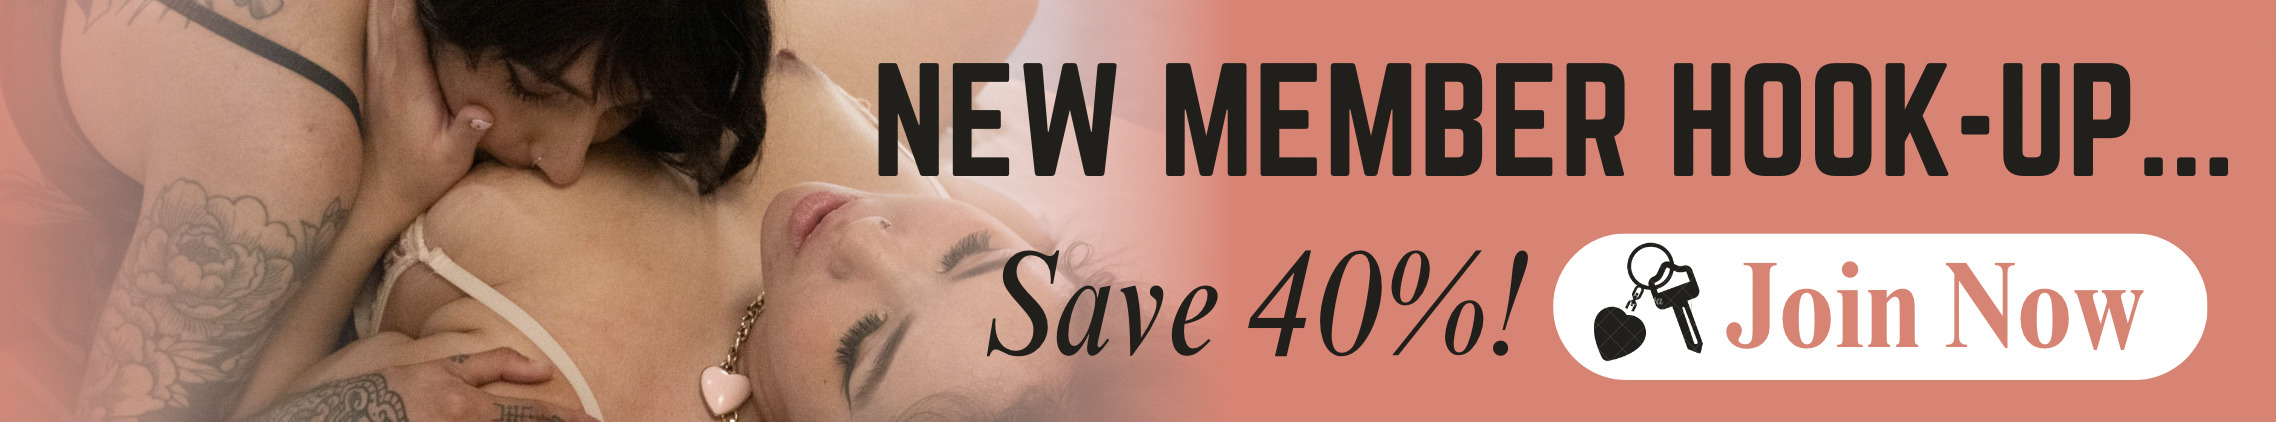 NEW MEMBER HOOK-UP... Save 40%! Click here to Join Now!